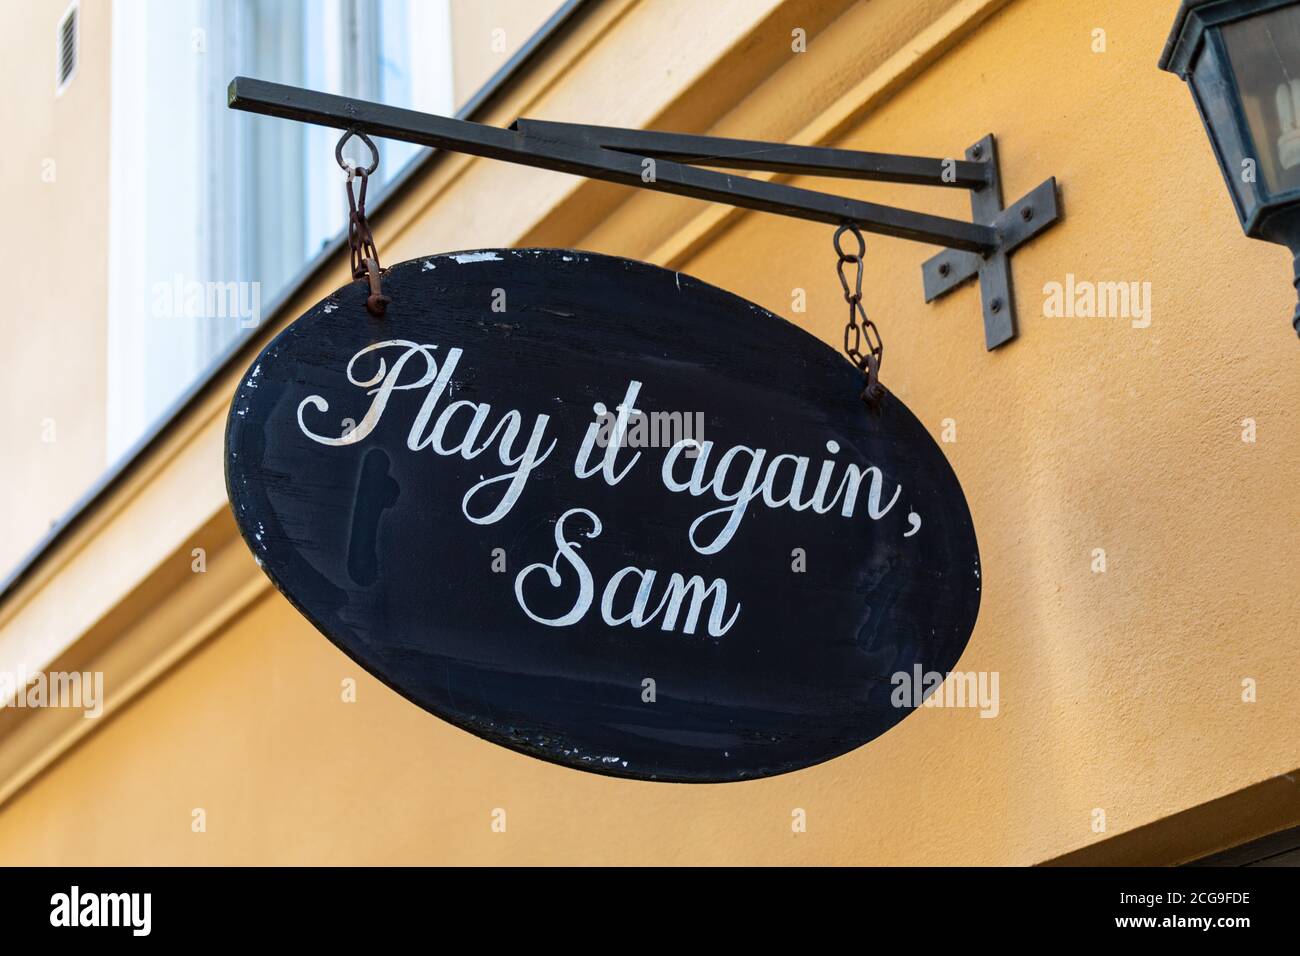 Play it again, Sam. Hanging sign over vintage and second-hand clothing shop entrance in Kruununhaka district of Helsinki, Finland. Stock Photo